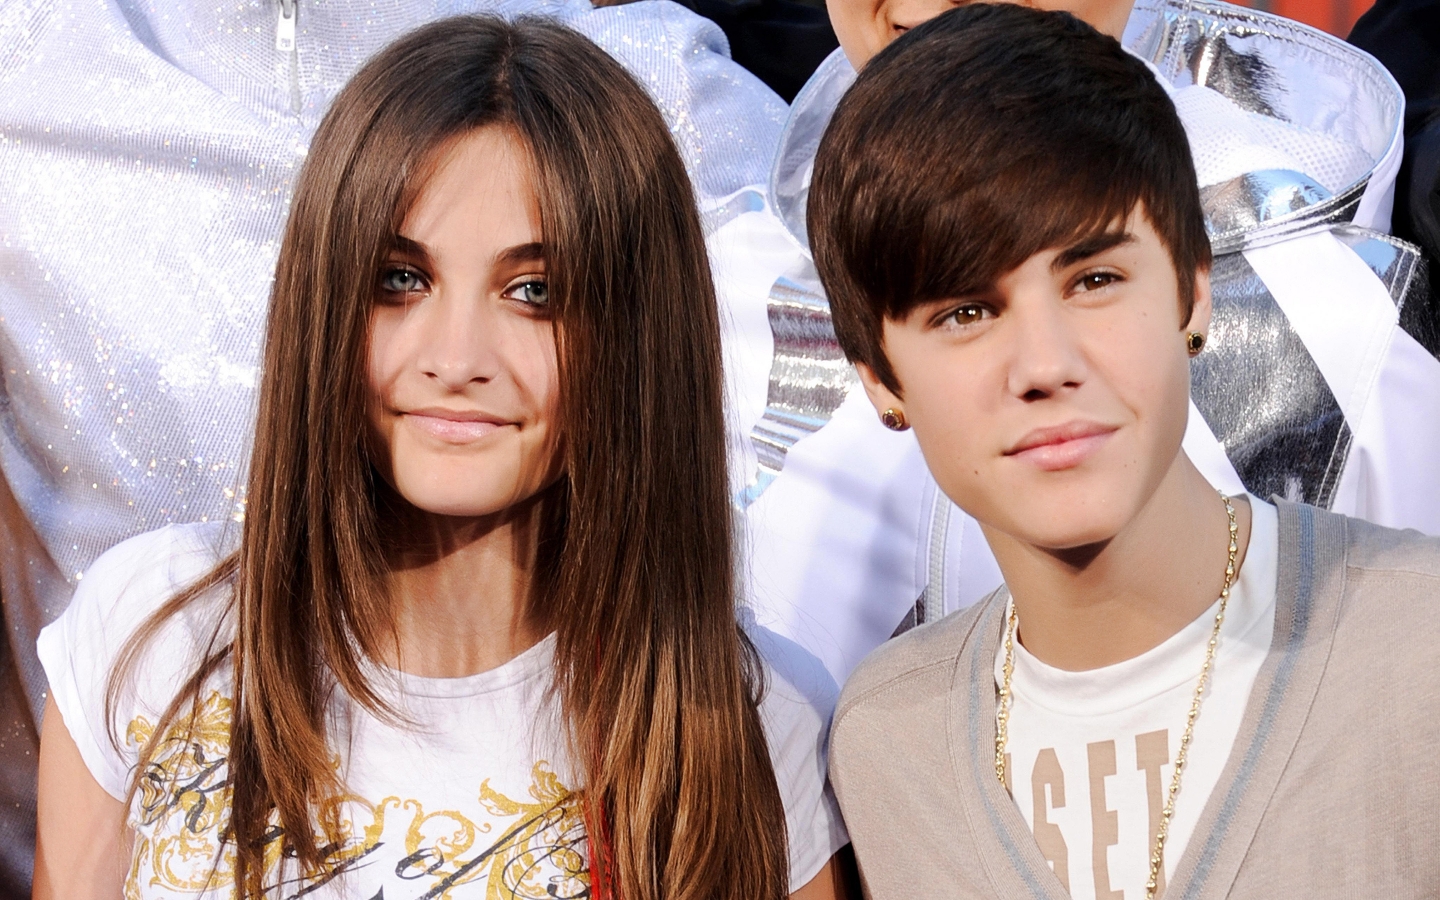 Paris Jackson and Justin Bieber for 1440 x 900 widescreen resolution